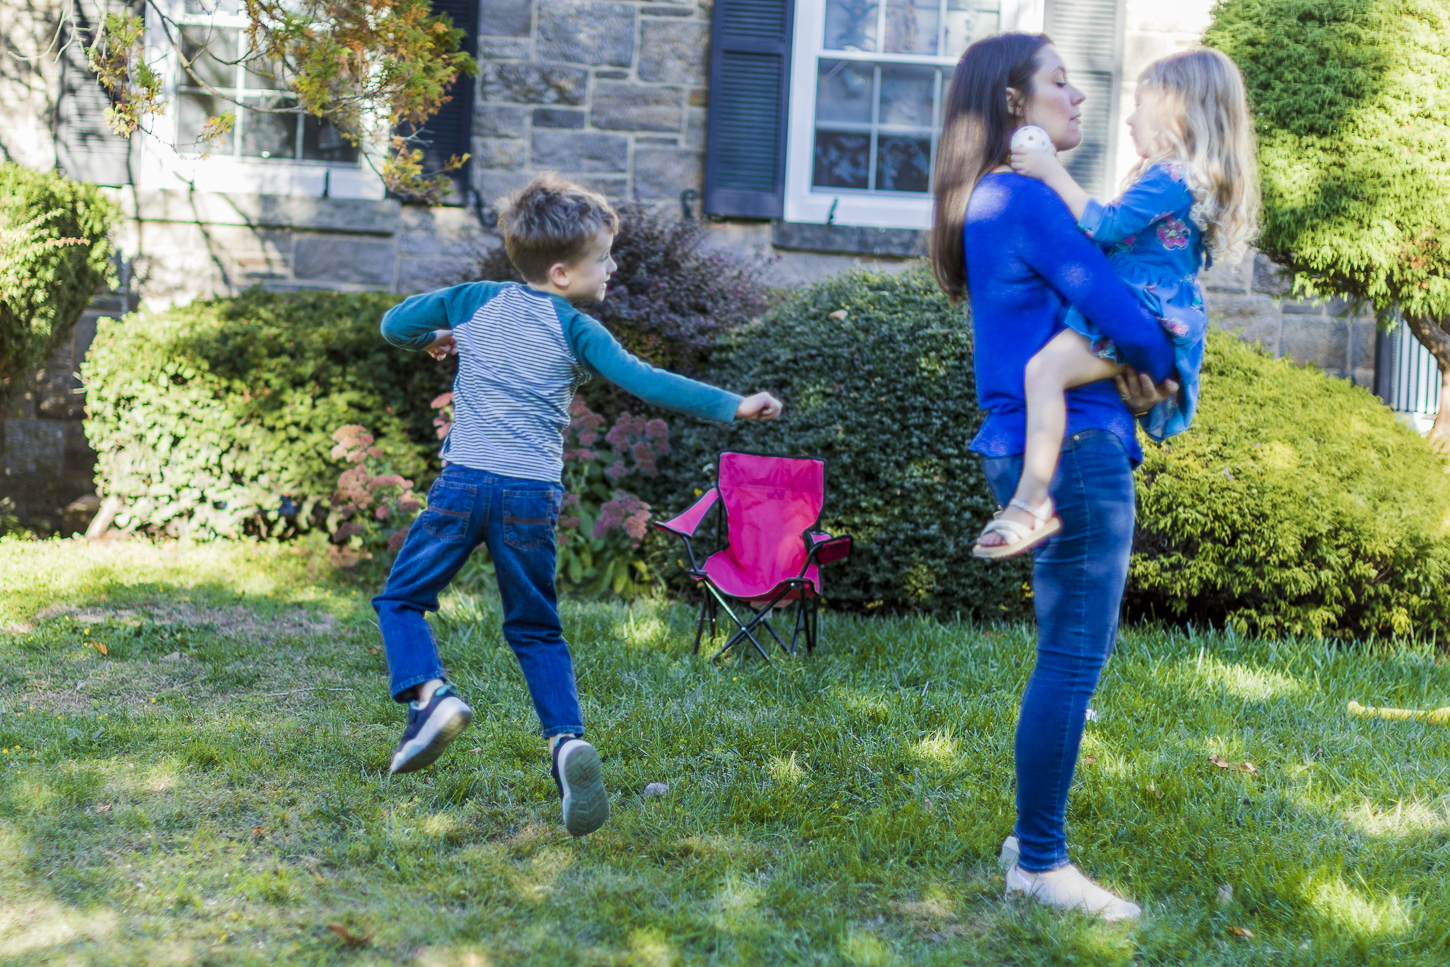 Jessica York stands, holding her daughter as her son (left) spins around, playing in their front yard. Jessica is wearing a blue shirt and blue jeans. Her daughter is wearing a floral blue dress, and her son is wearing a gray and green henley shirt with blue jeans.